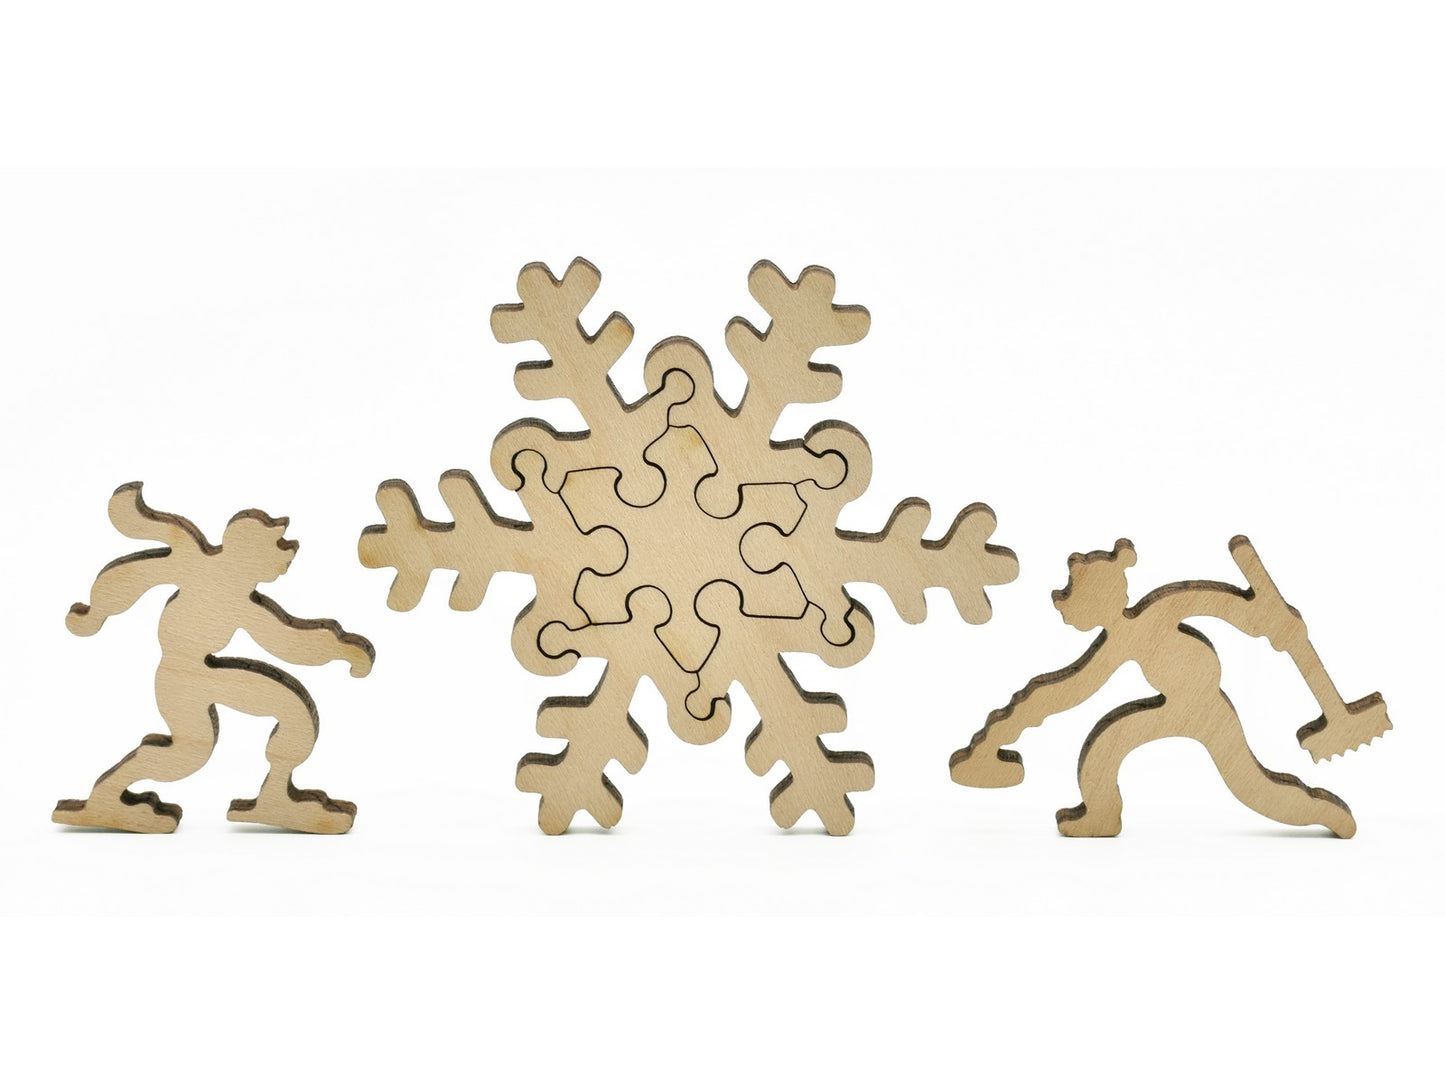  A closeup of pieces in the shape of a snowflake and people skating.